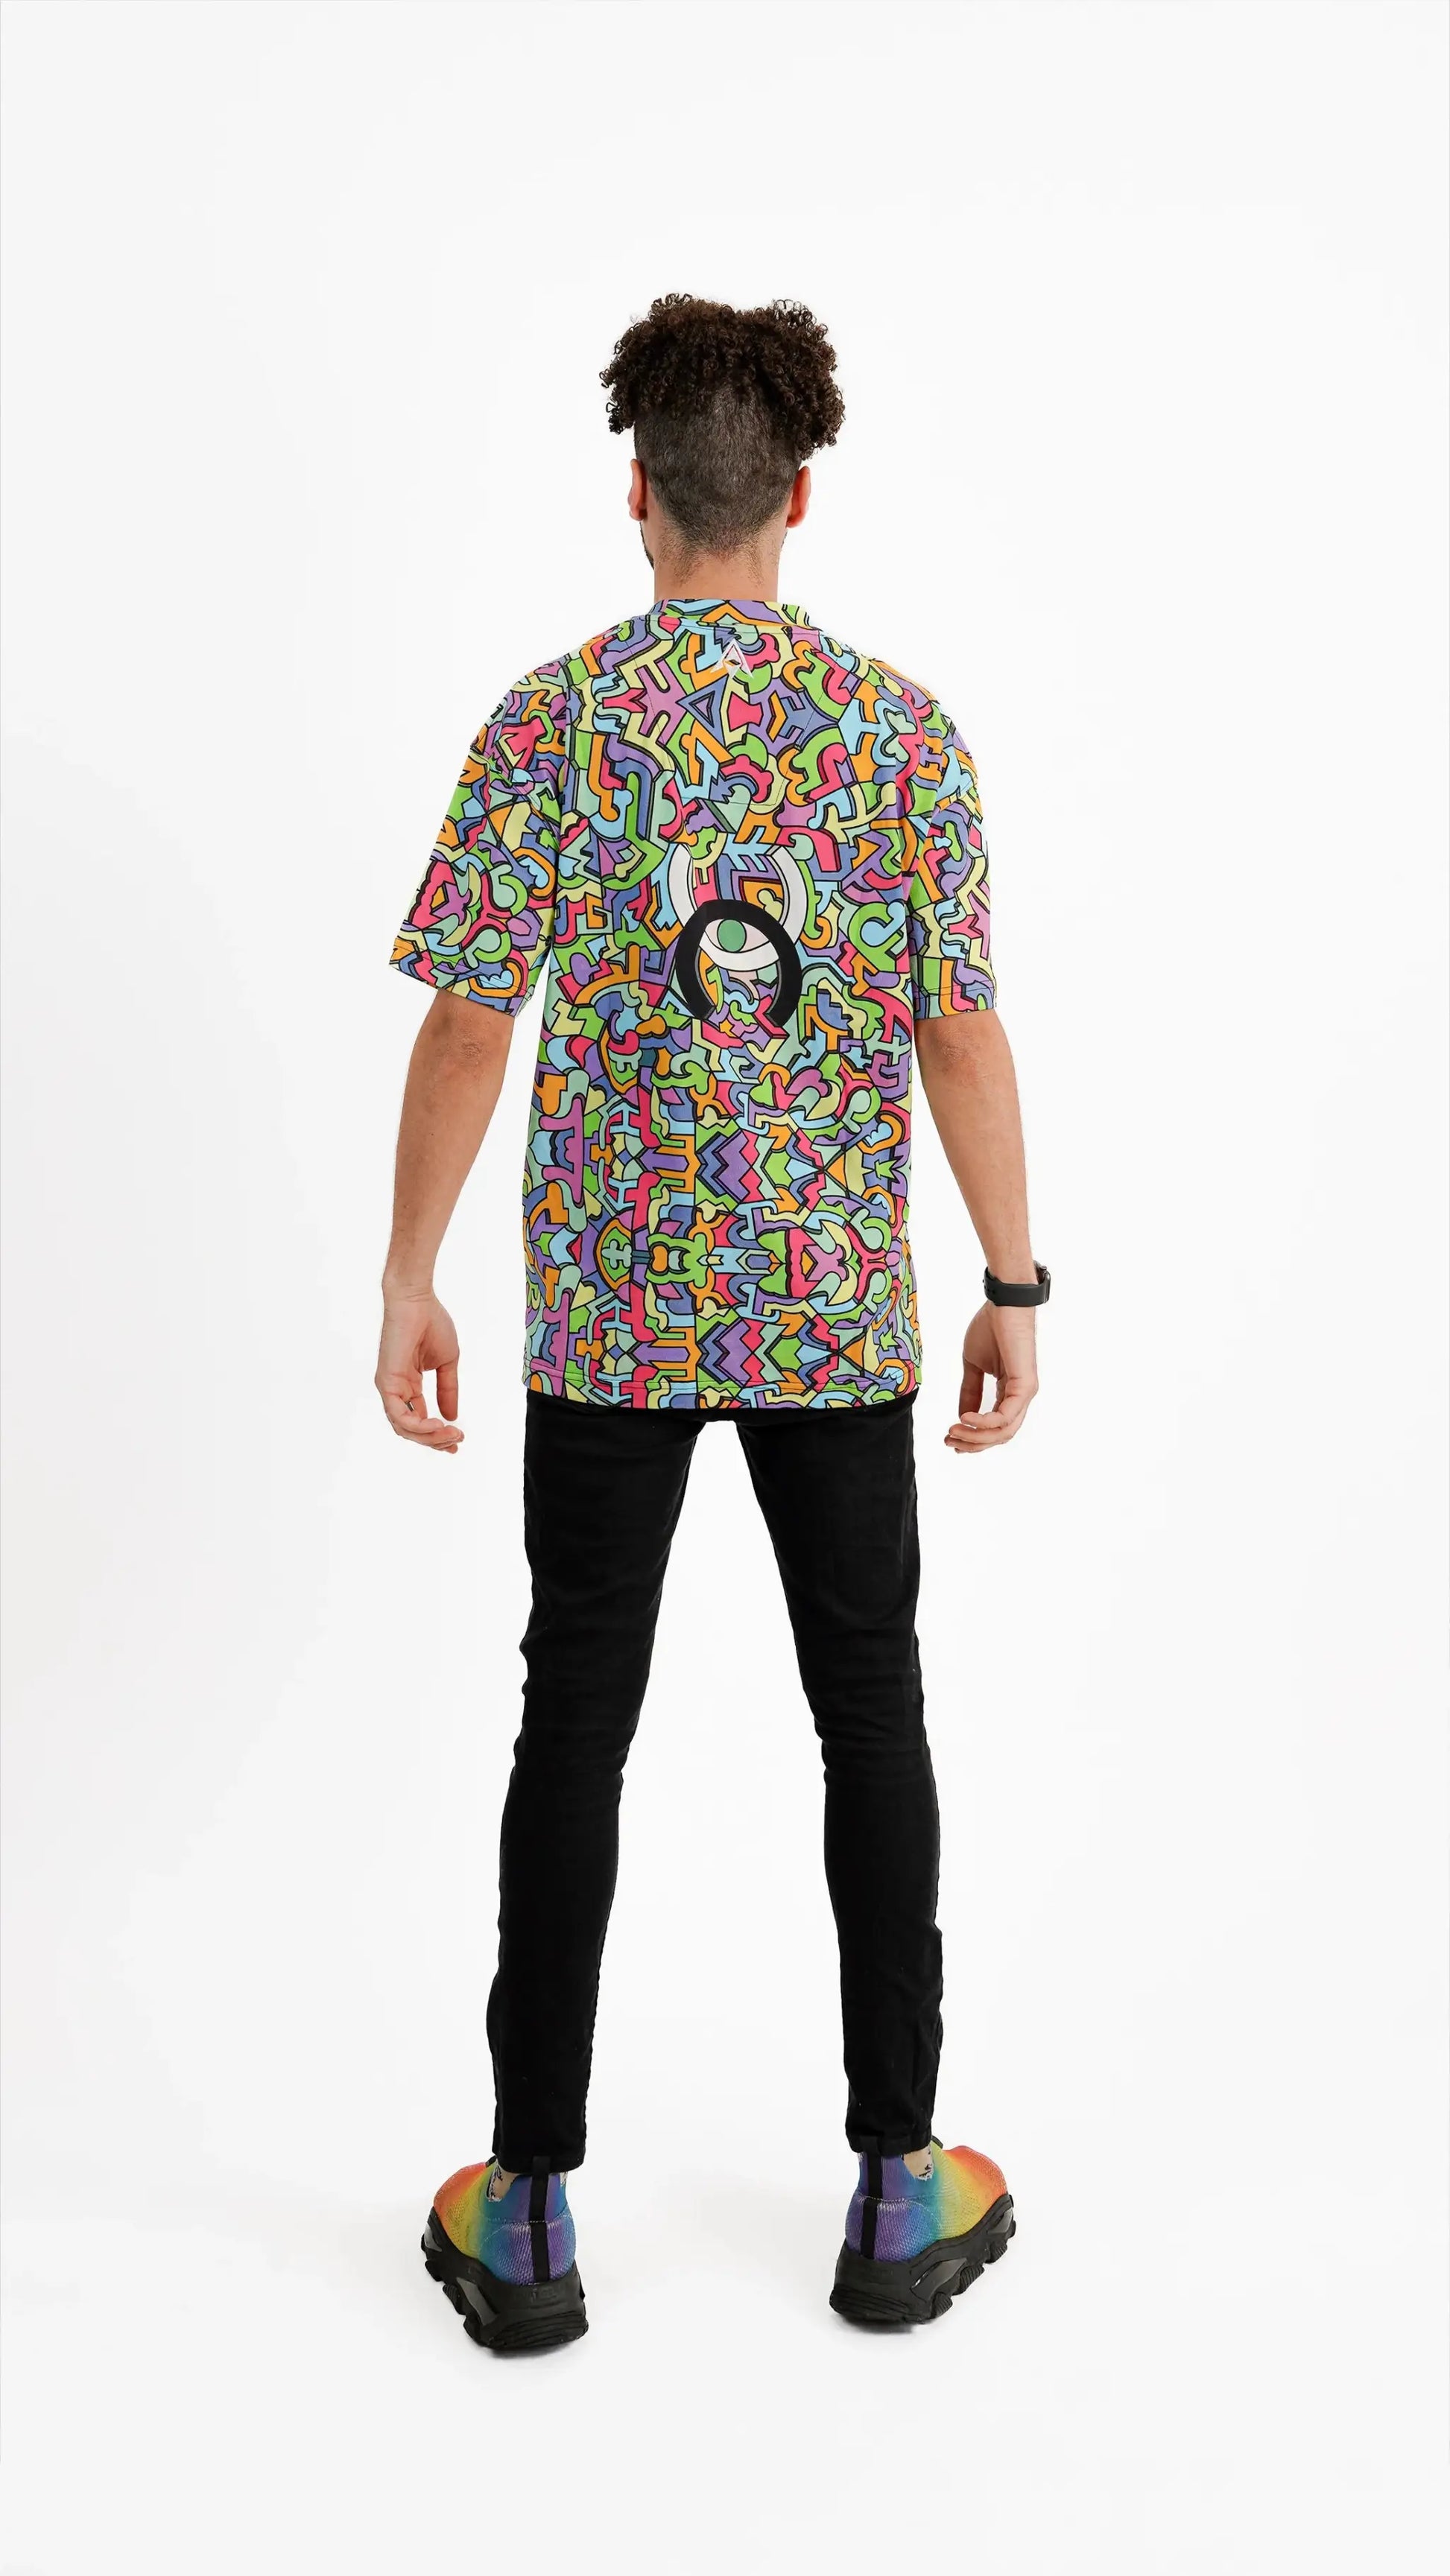 Model wearing Psychedelic Tee with colourful pattern.